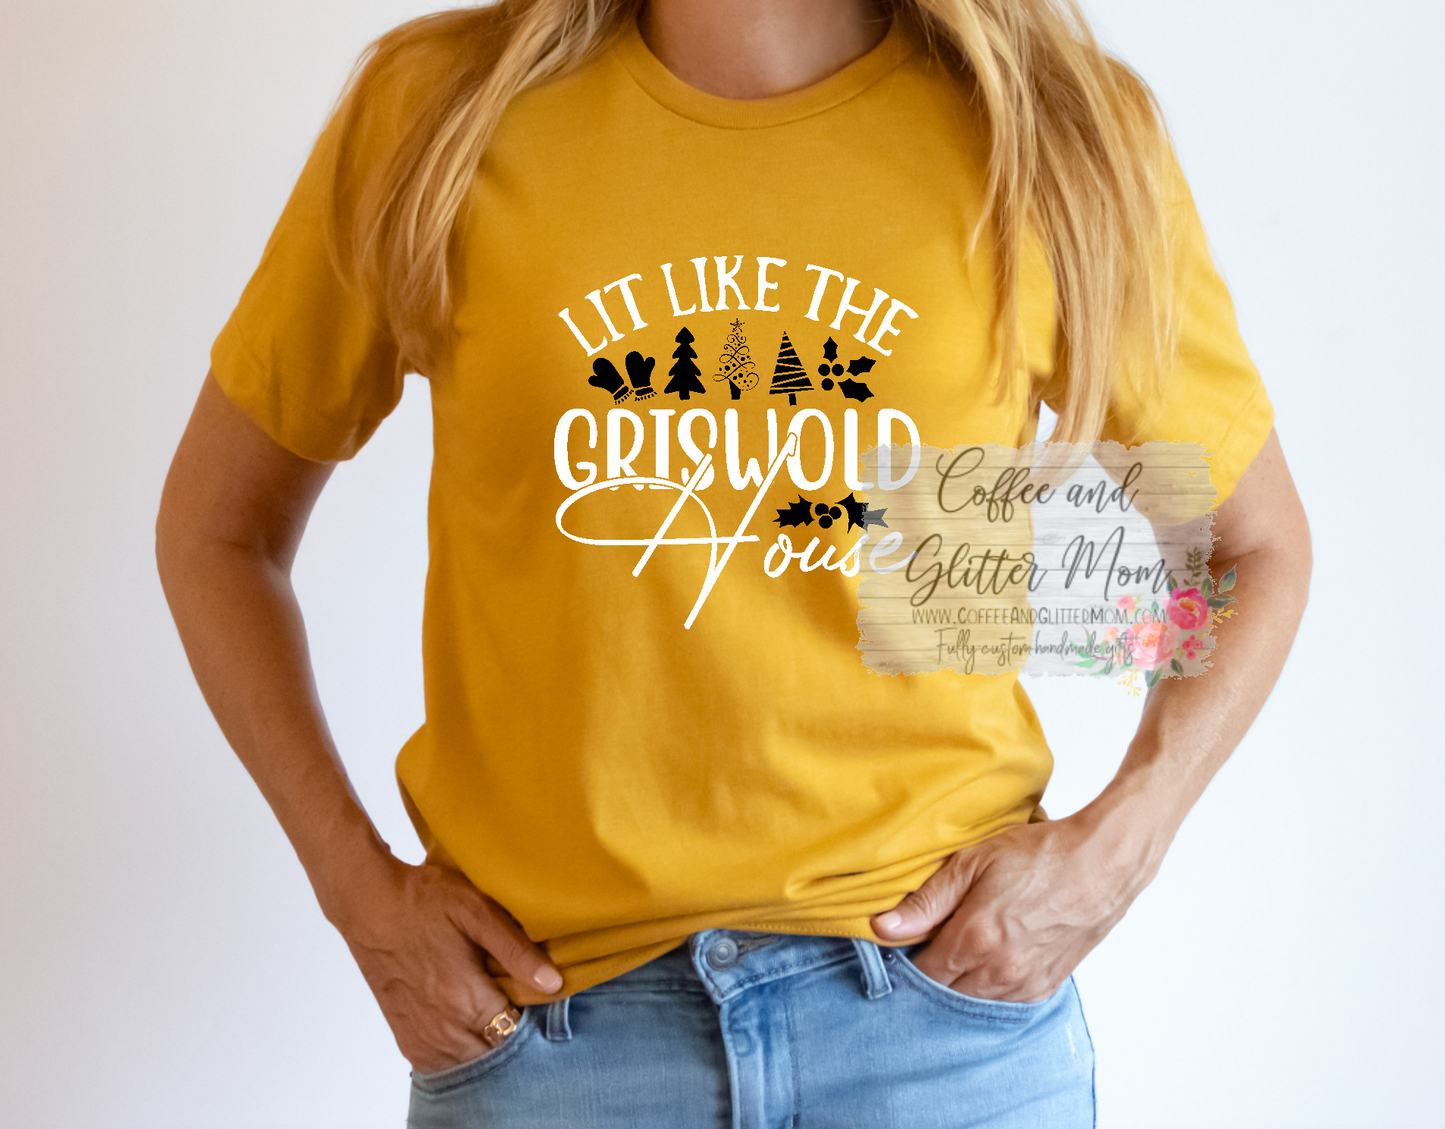 Lit Like The Griswold House Unisex Tee